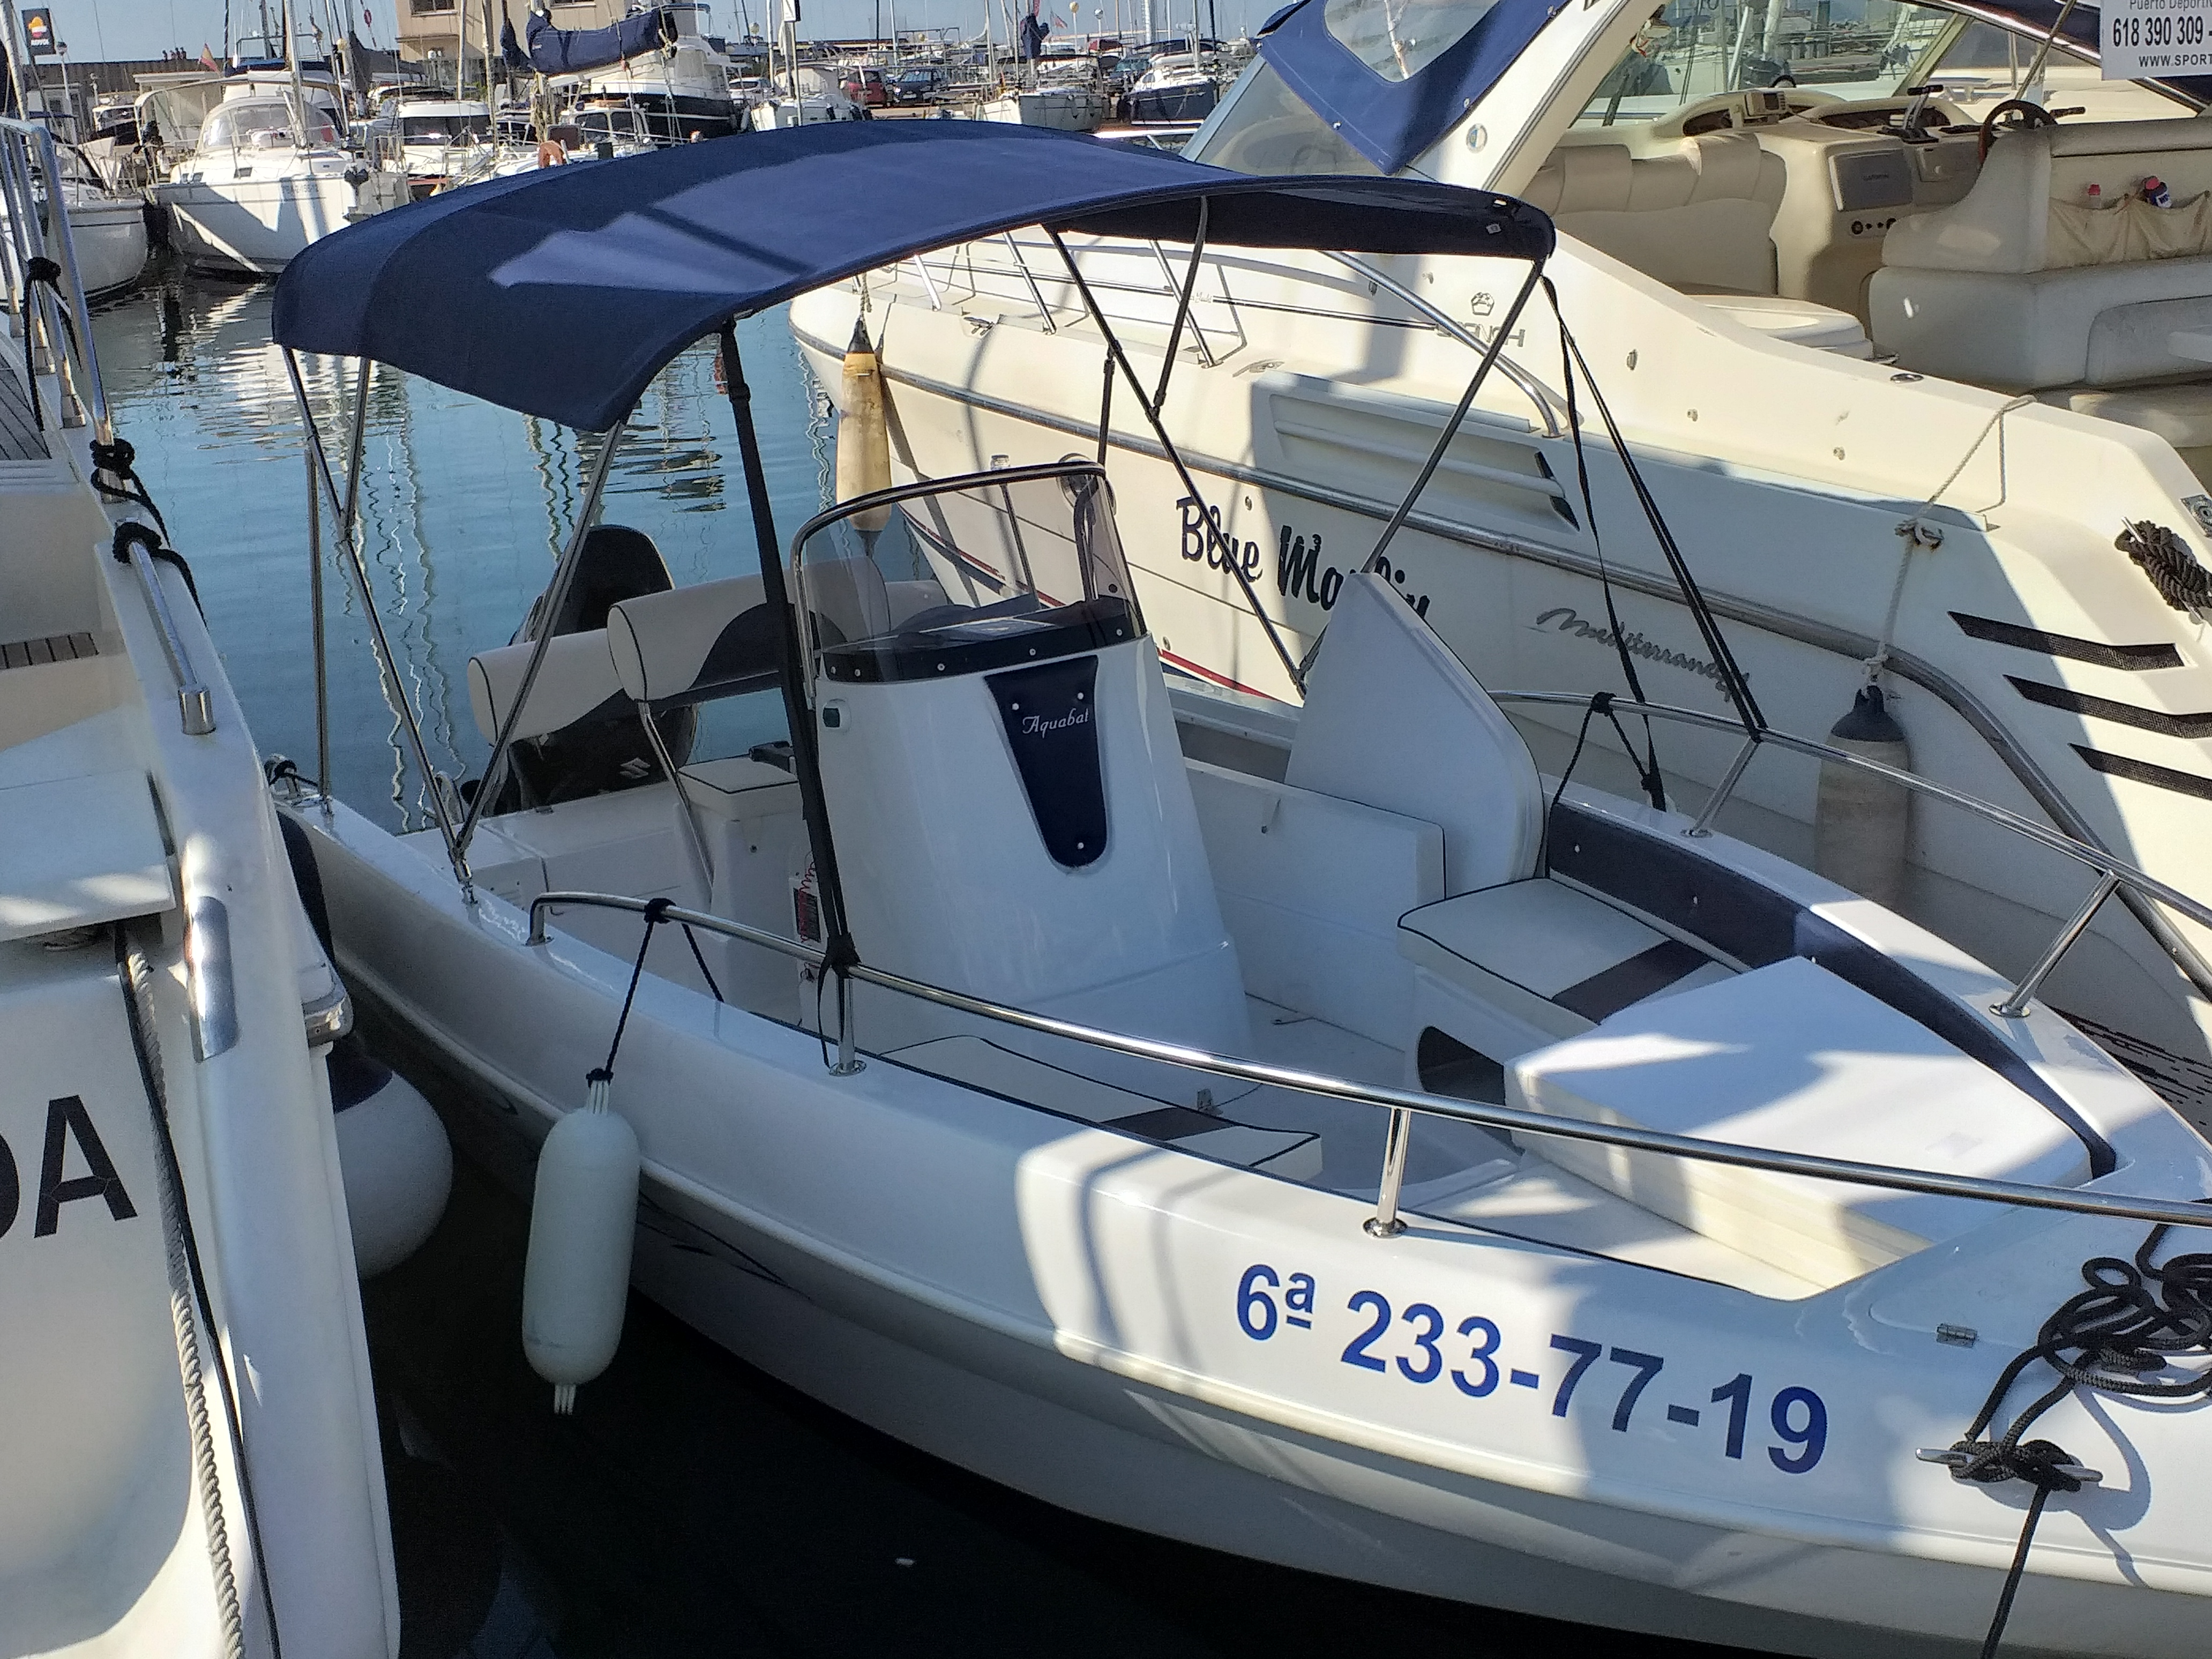 Power boat FOR CHARTER, year 2019 brand Aquabat and model Sport Line 19, available in Club de Vela de Blanes Blanes Girona España